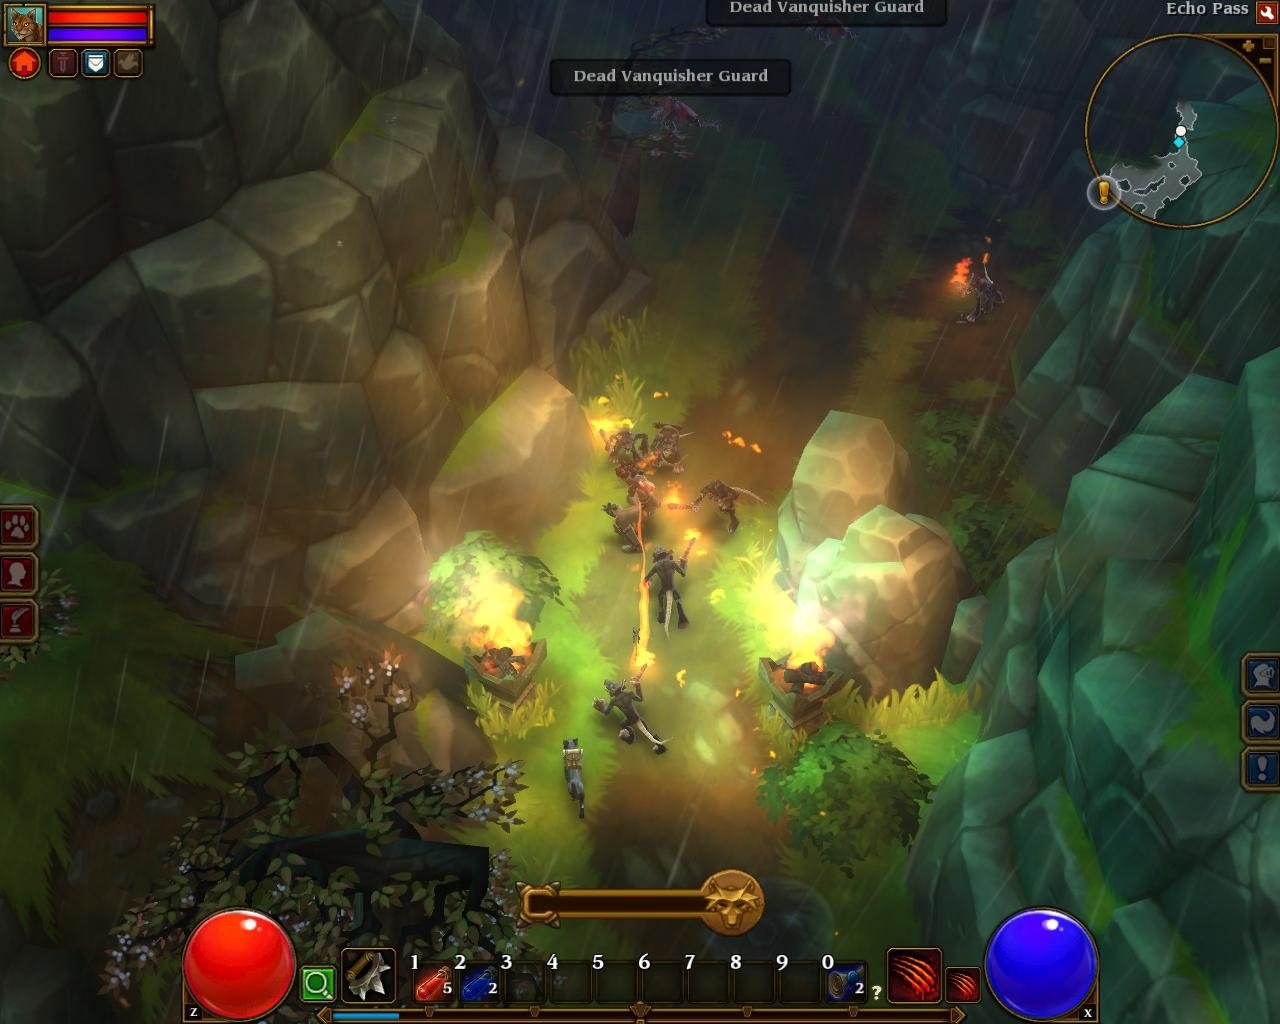 download torchlight 2 xbox one